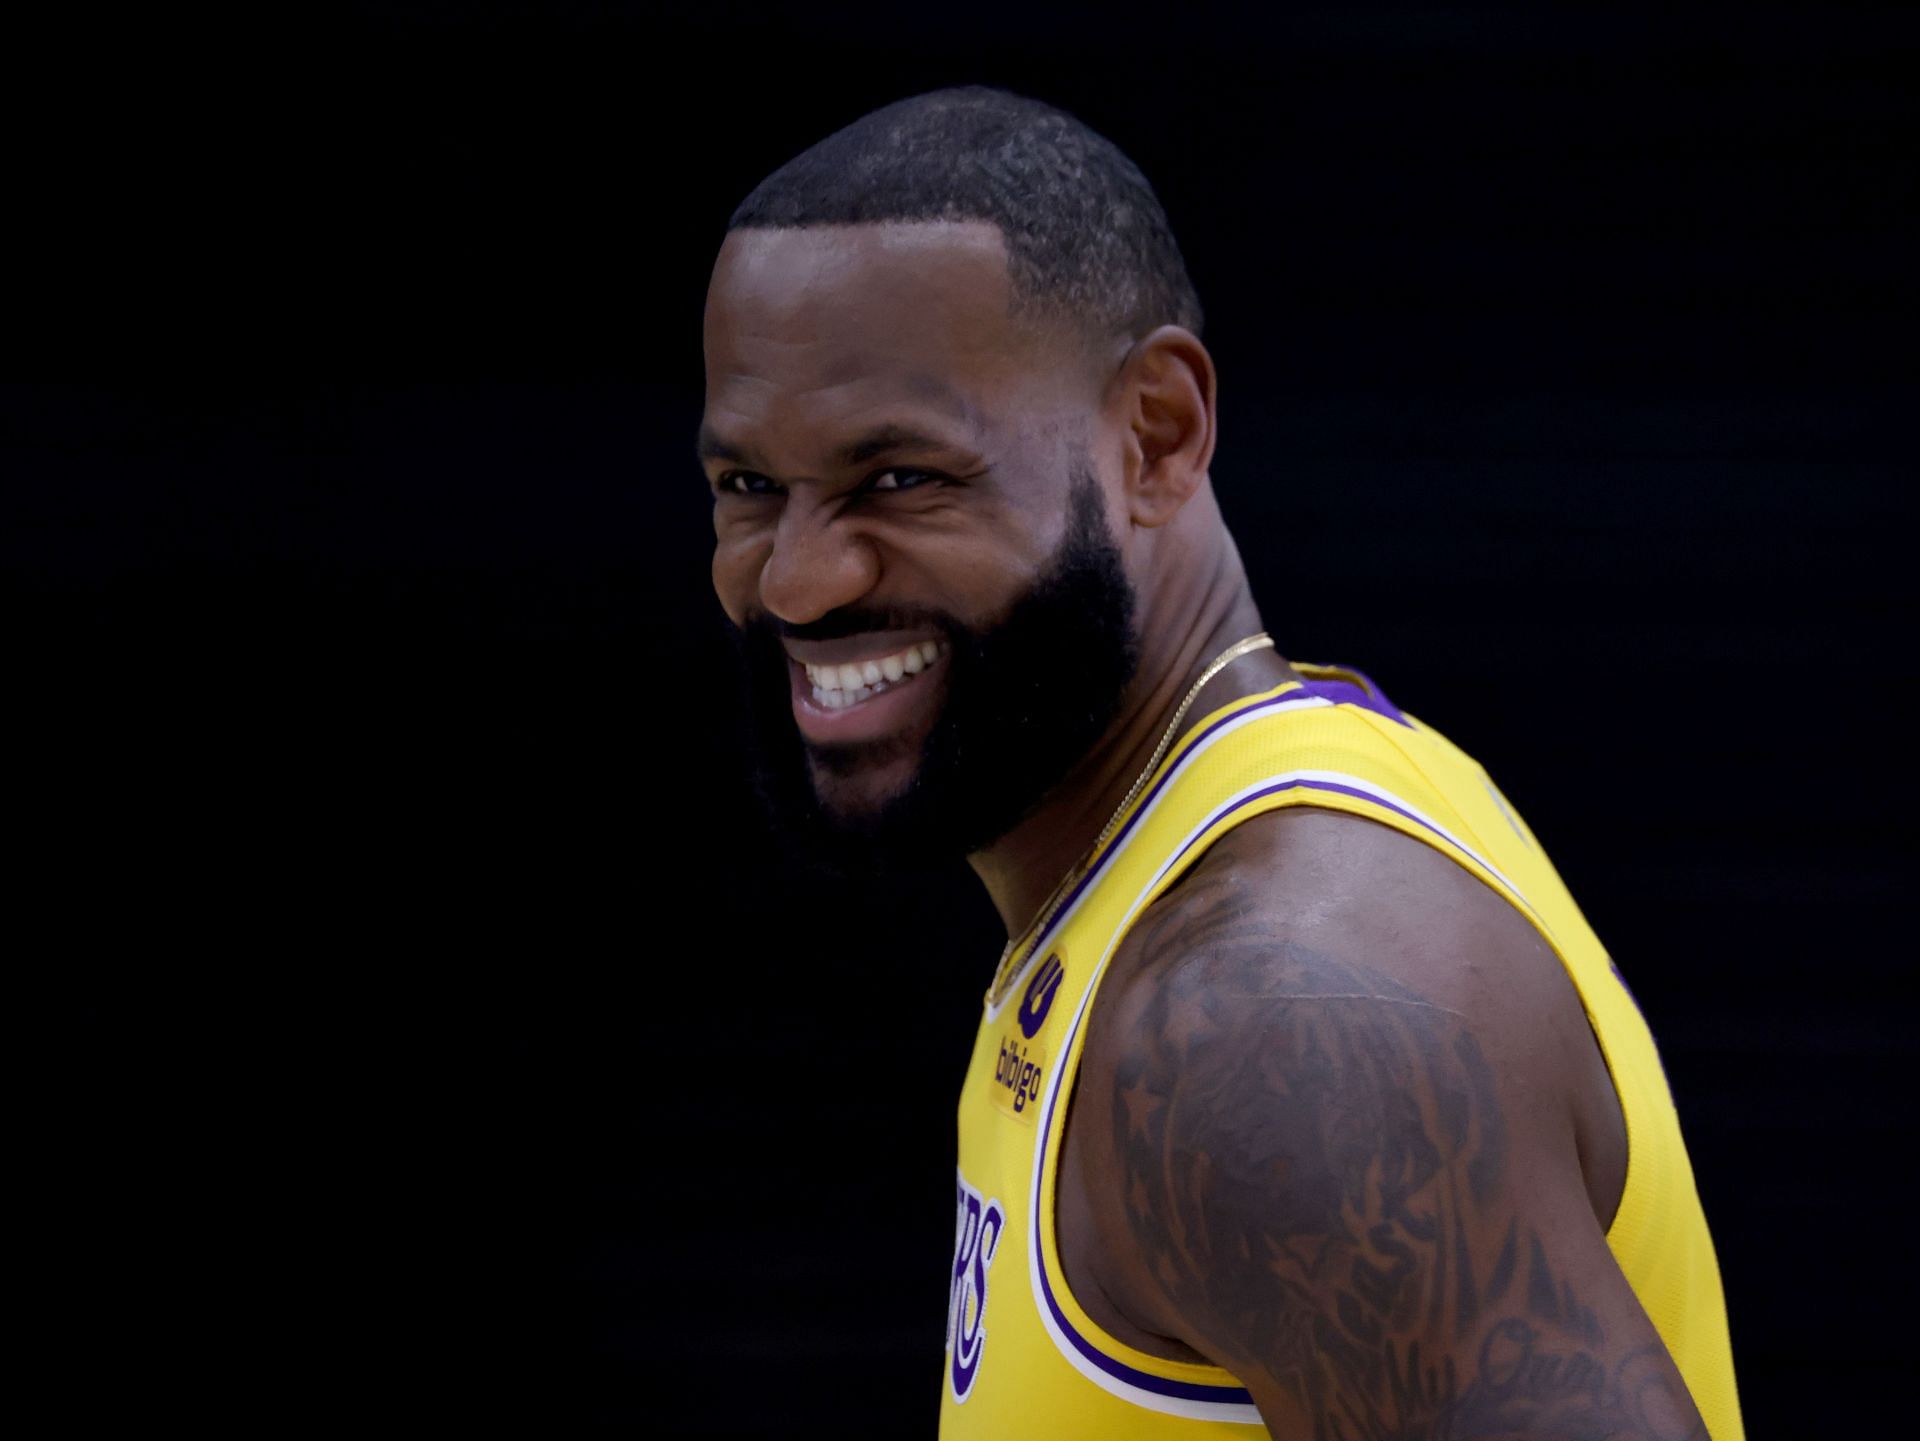 LeBron James is a big jokester, according to a former teammate and NBA champion.